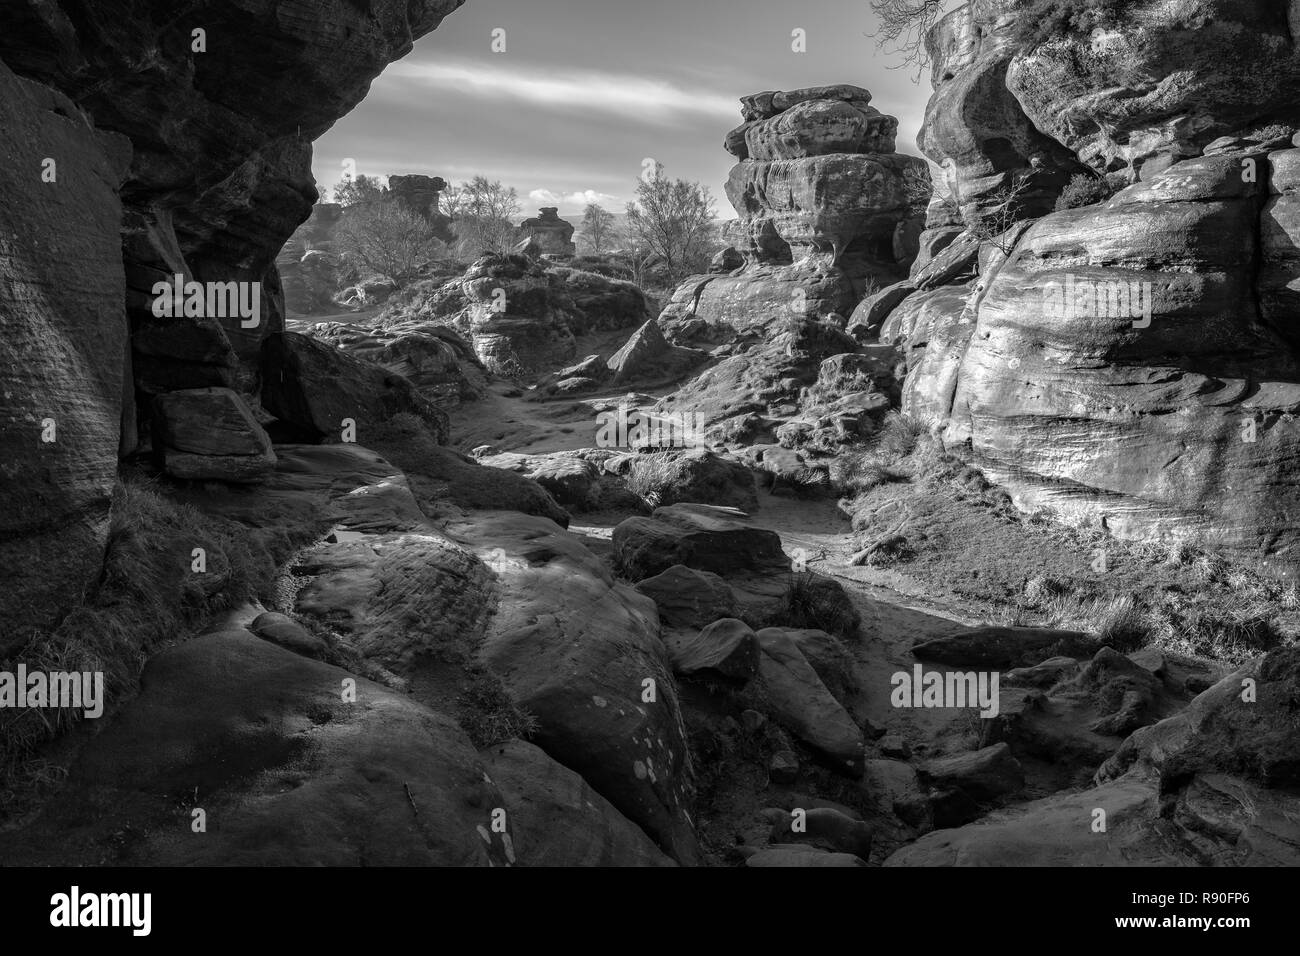 Natural Sandstone Rock Formations. Brimham Rocks. Rock Canyon. Black and White Stock Photo